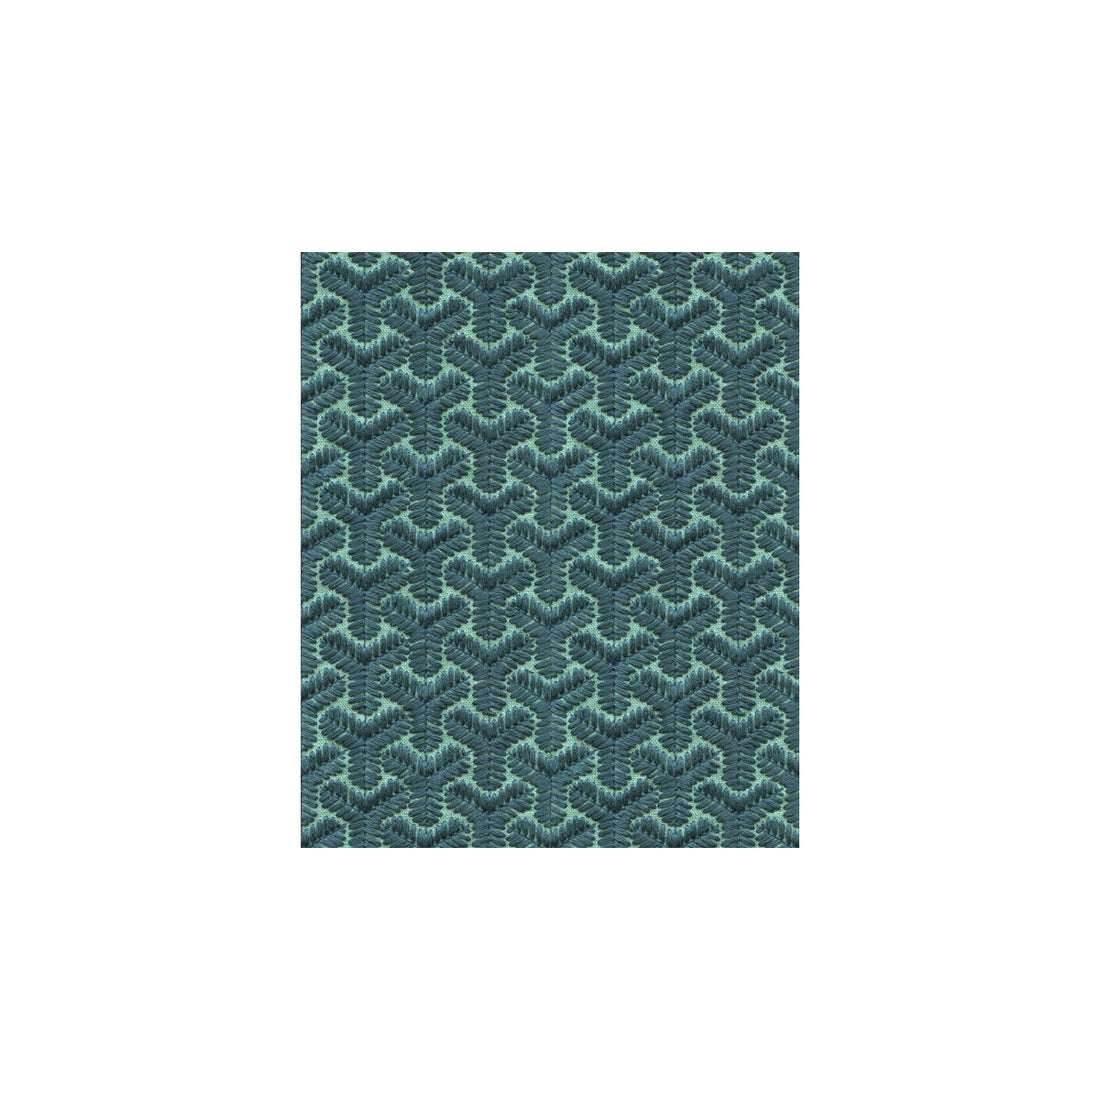 Chengtudoor Emb fabric in blue/aqua color - pattern GWF-3320.513.0 - by Lee Jofa Modern in the David Hicks 3 By Ashley Hicks collection